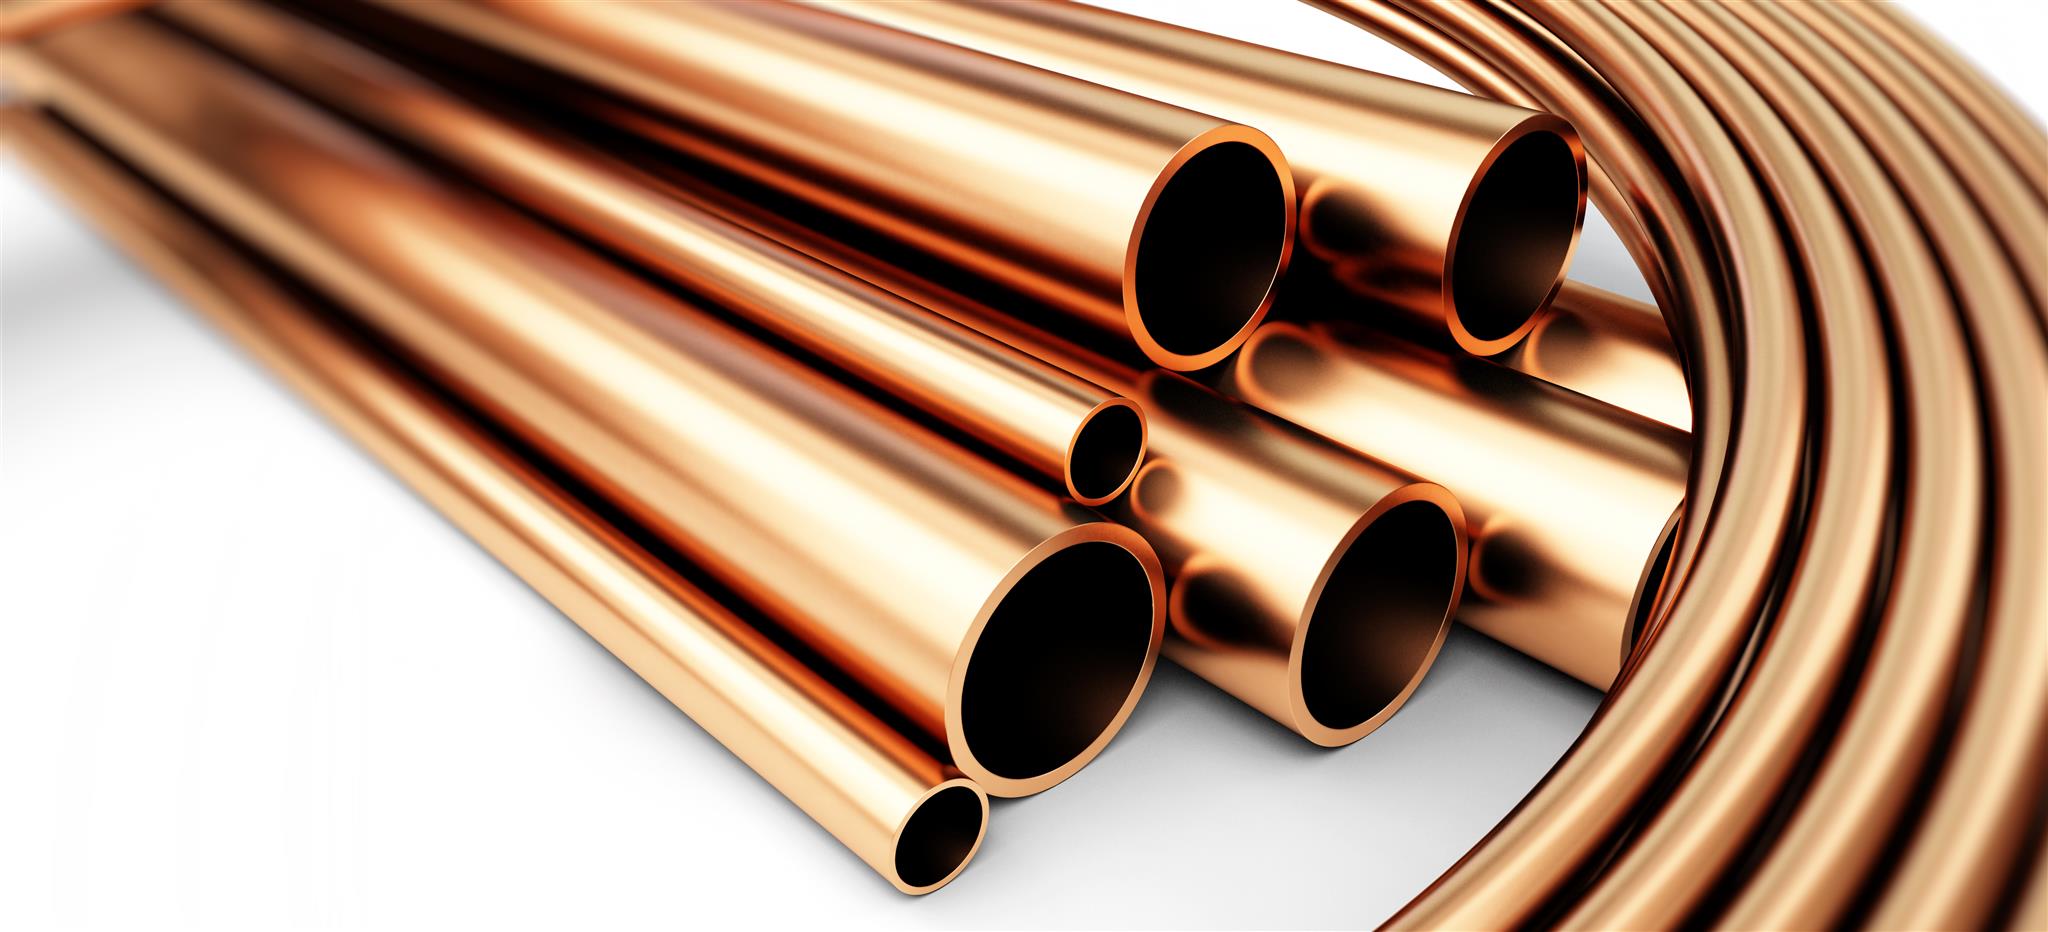 Copper Pipe Wholesale Distributor from Ahmedabad - Republic Metals